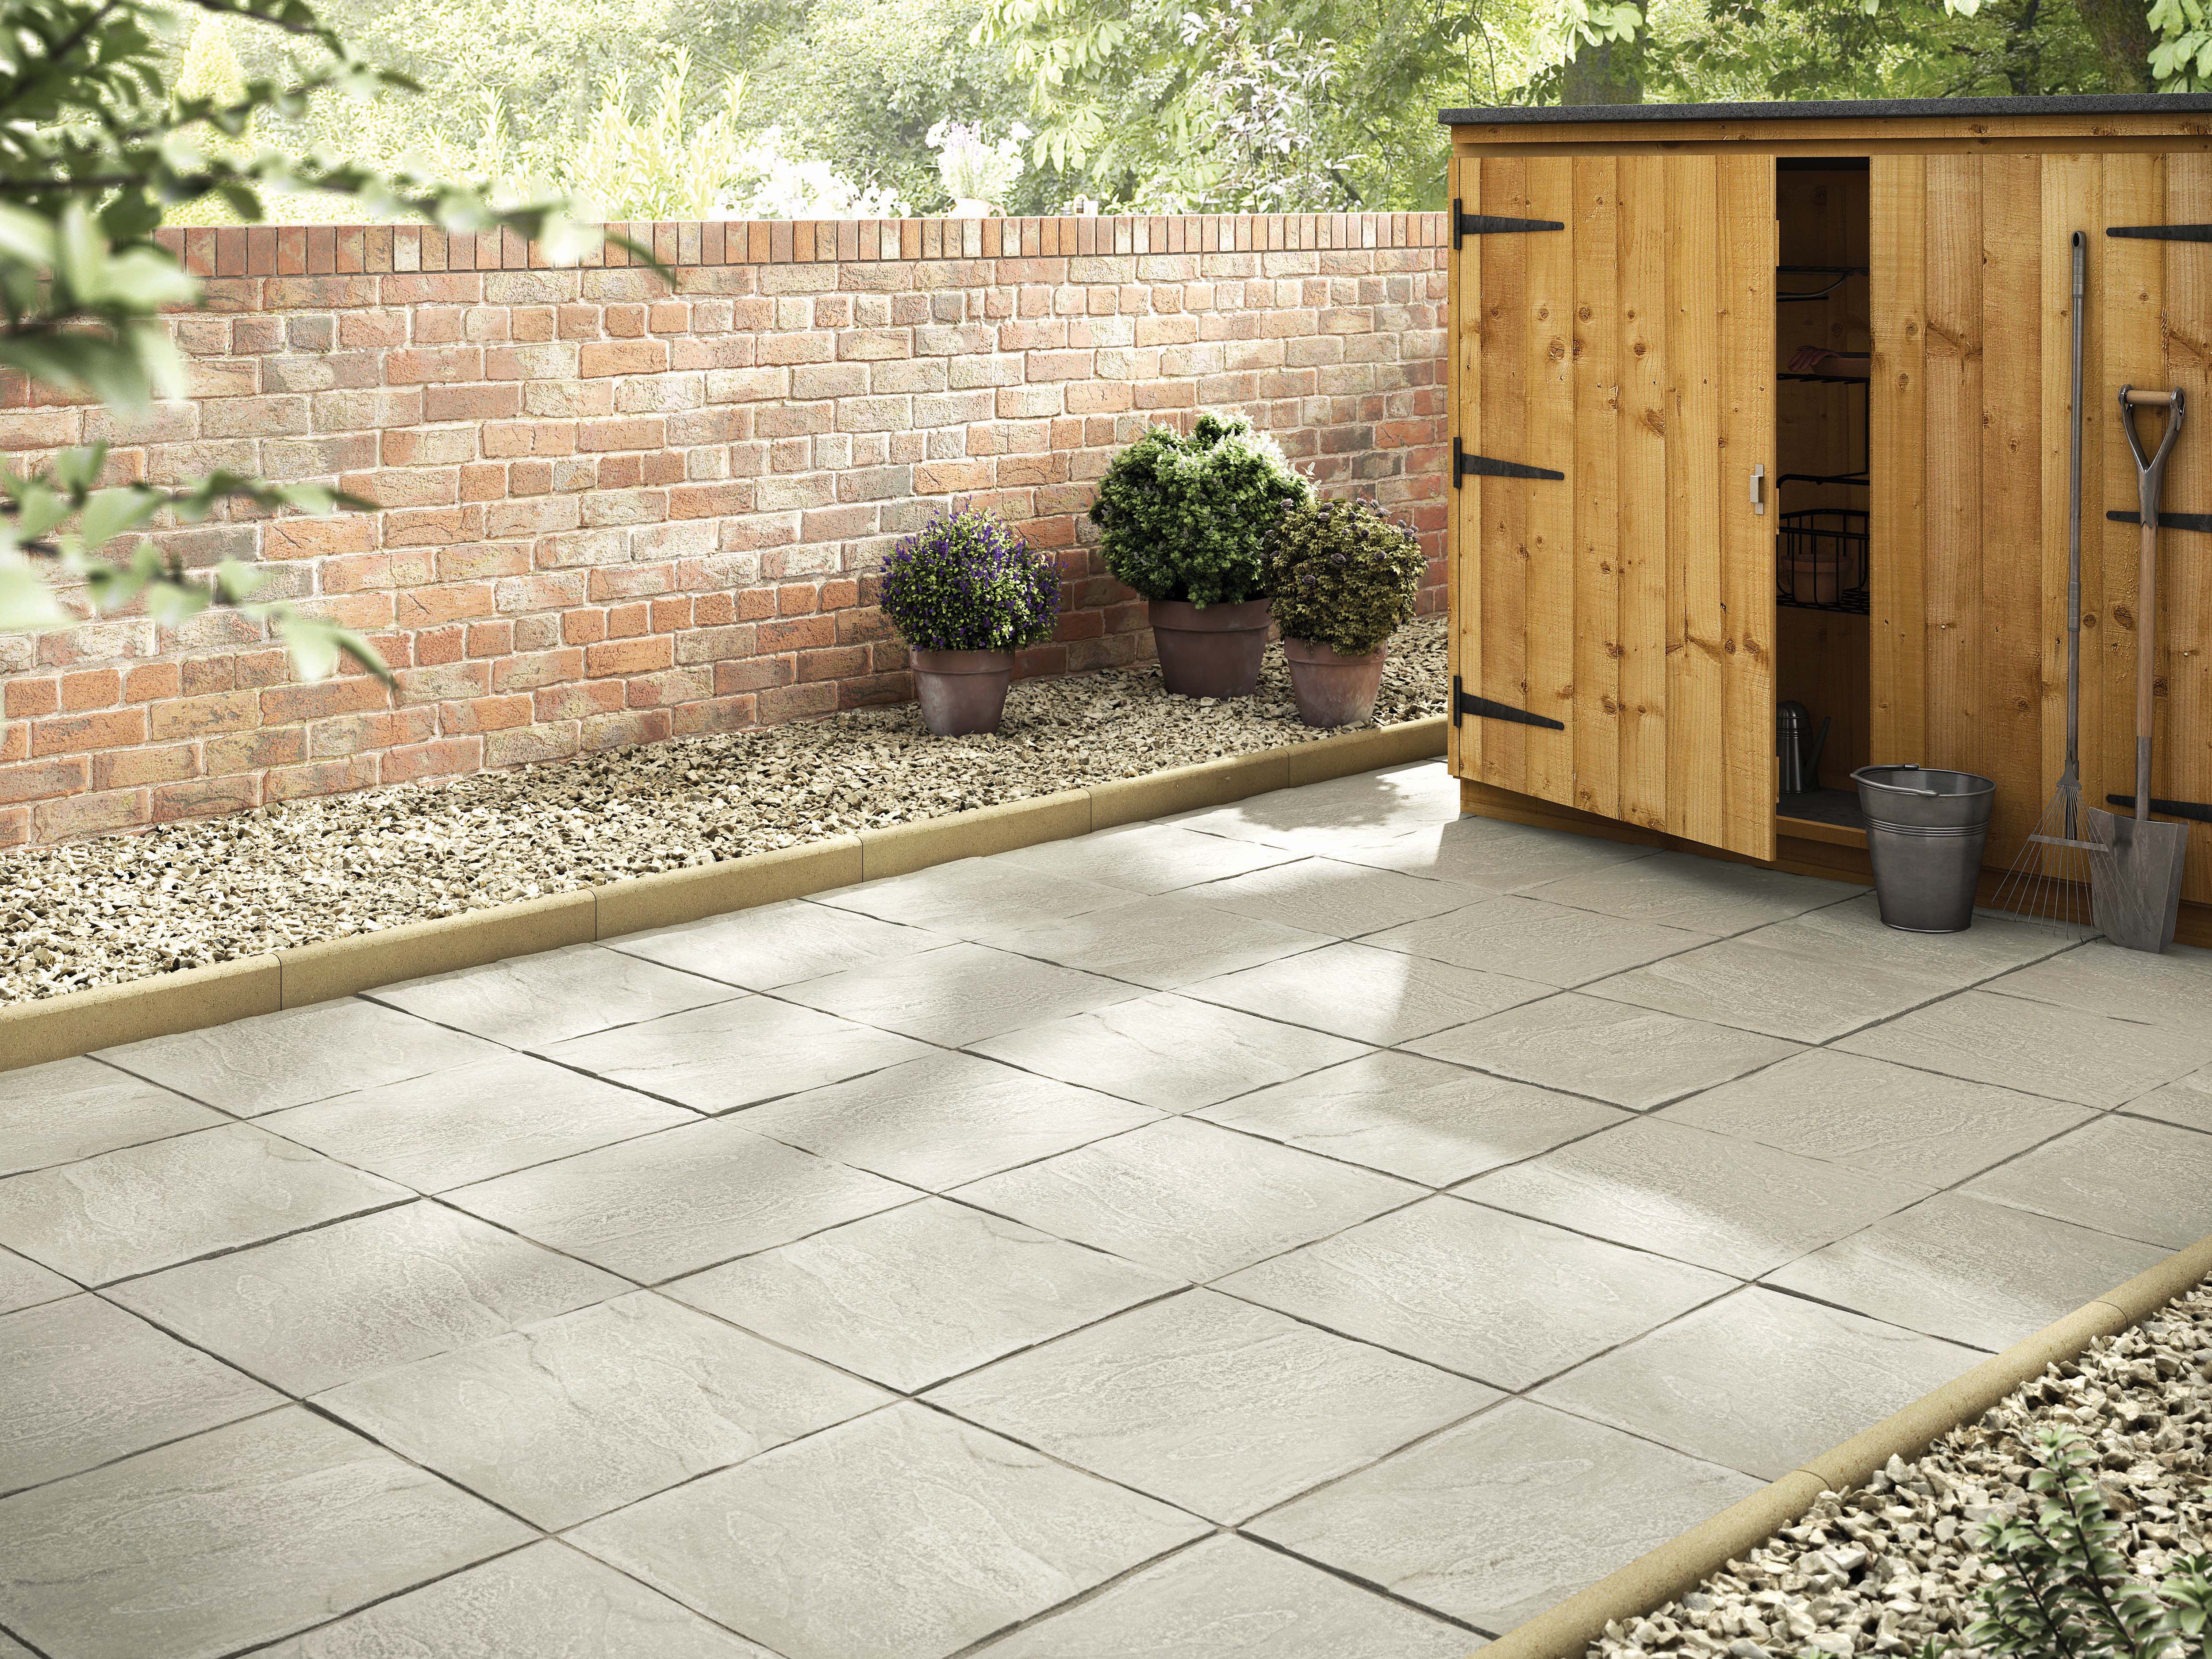 Marshalls Pendle Riven Grey Paving Slab - 450 x 450 x 32mm - Pack of 60